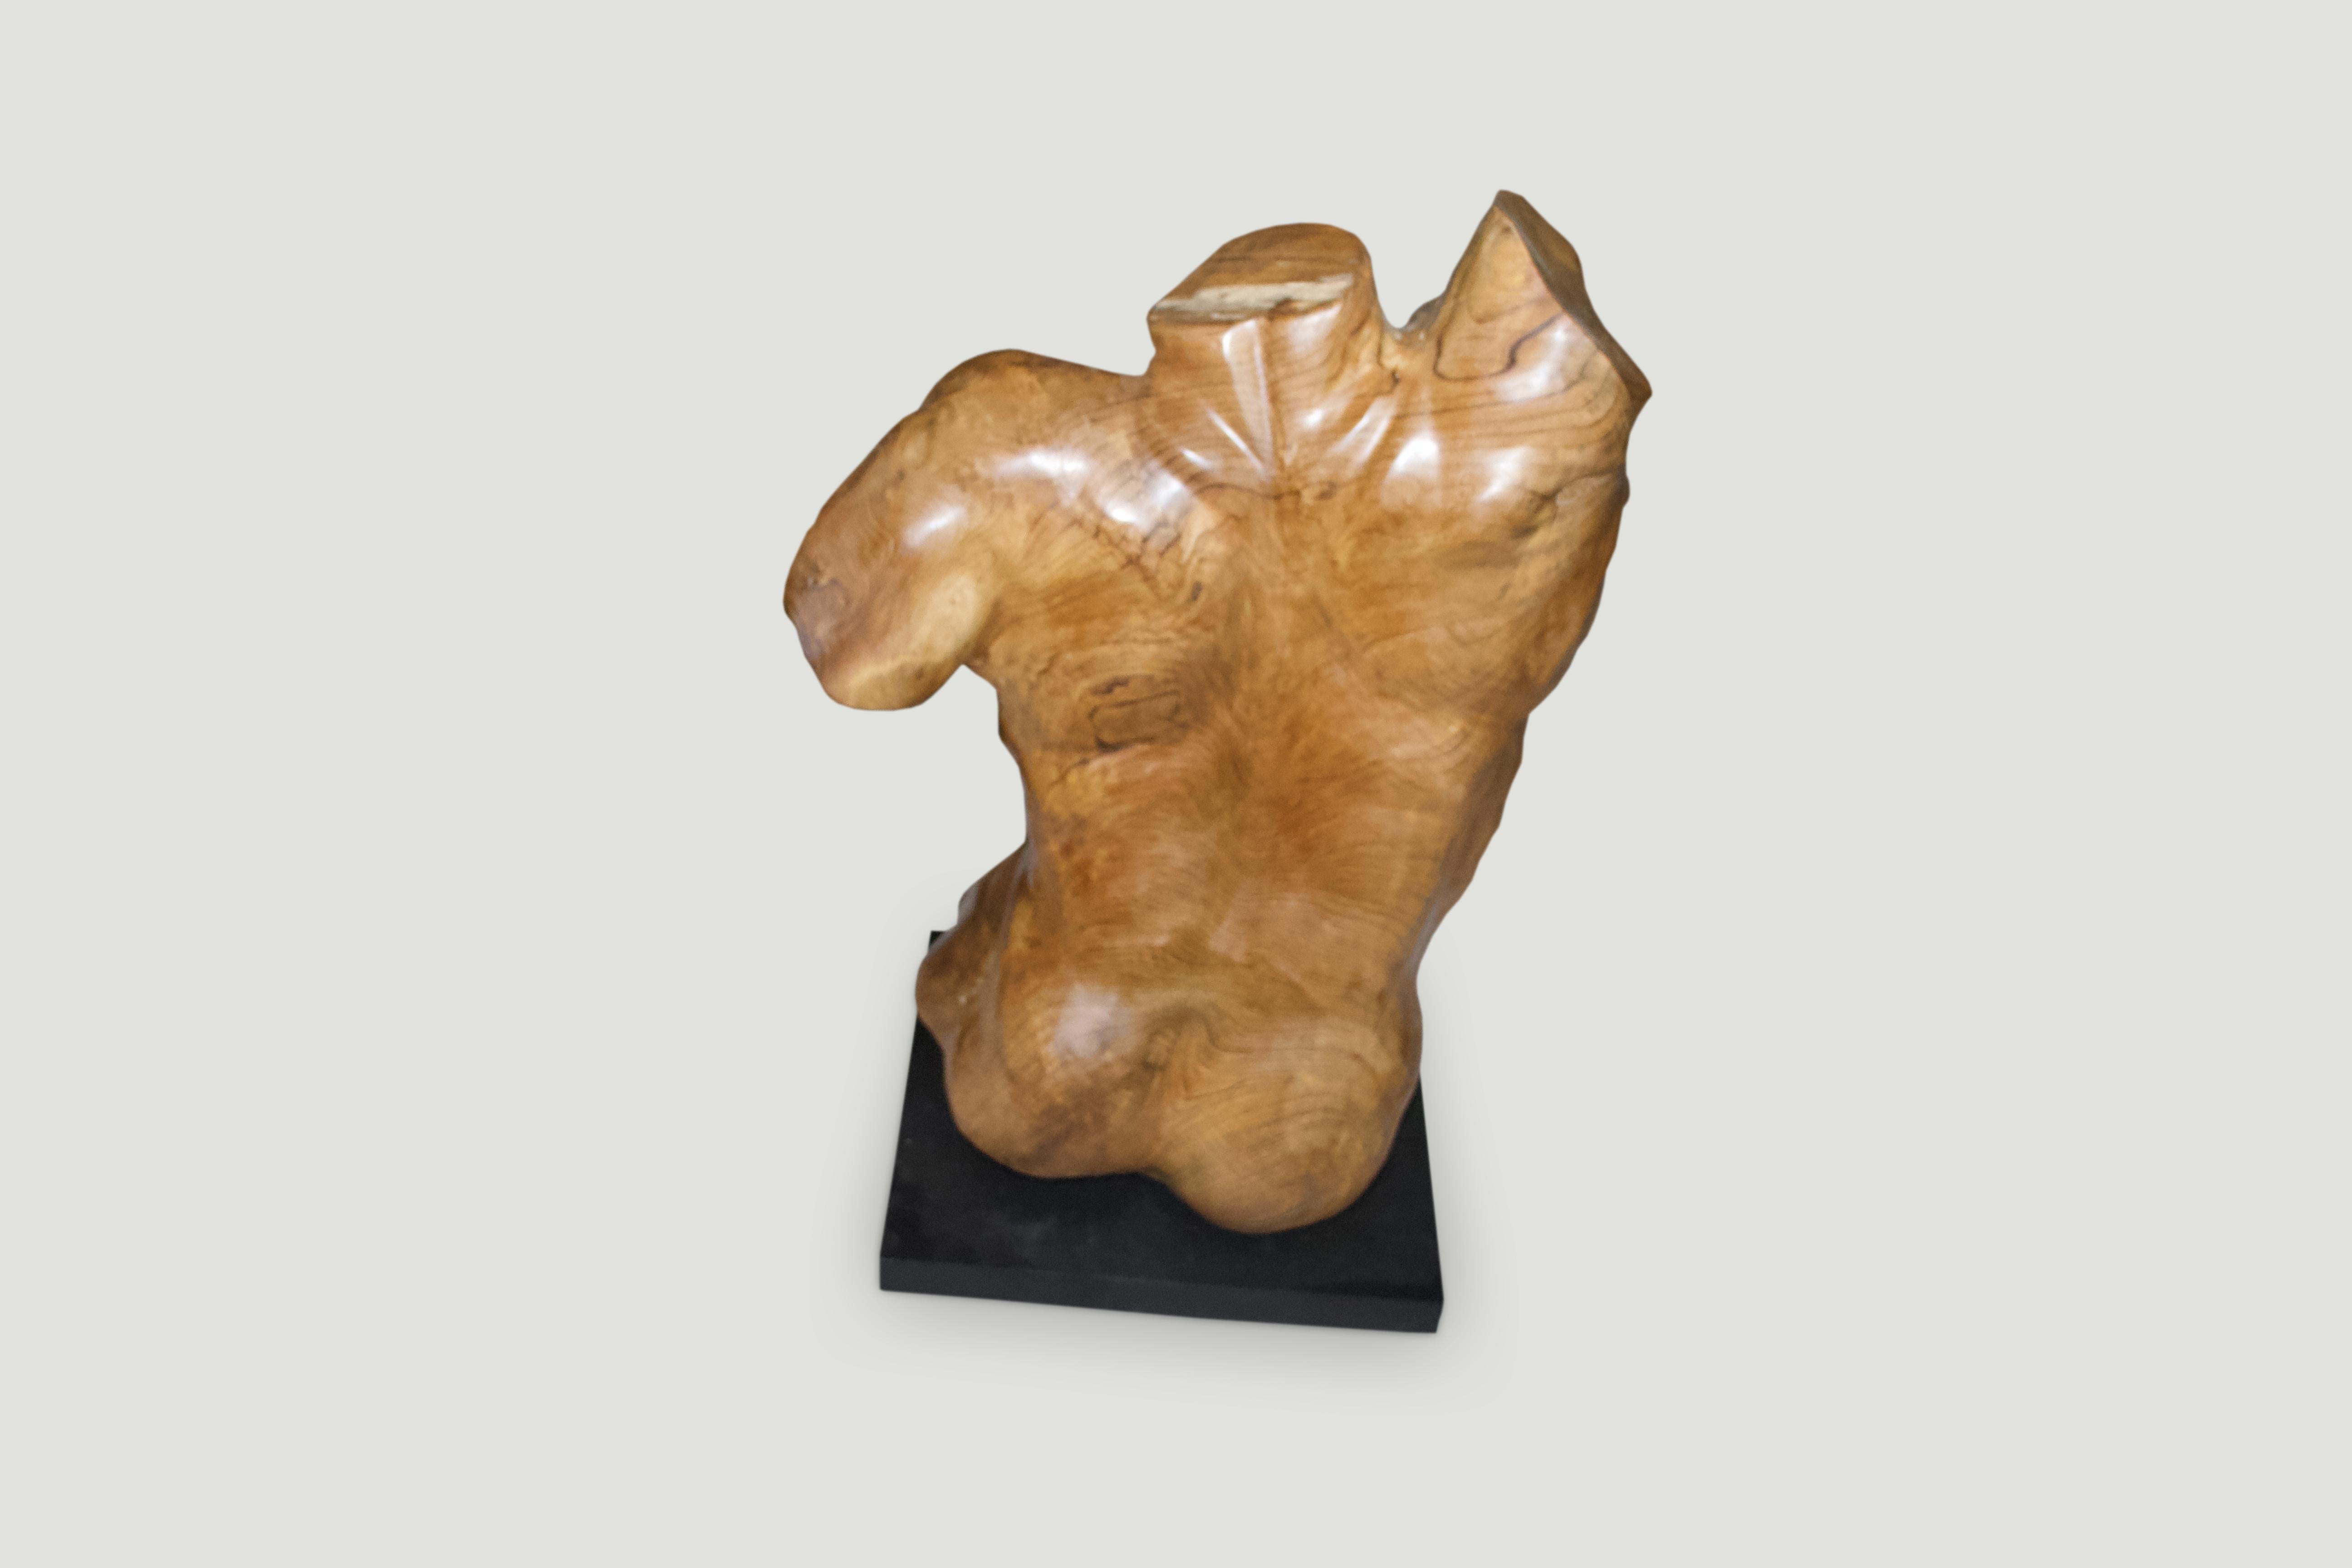 Hand carved from a single reclaimed teak wood root with natural oil finish, a male torso. Shown on a black metal base.

Own an Andrianna Shamaris original.

Andrianna Shamaris. The Leader In Modern Organic Design.